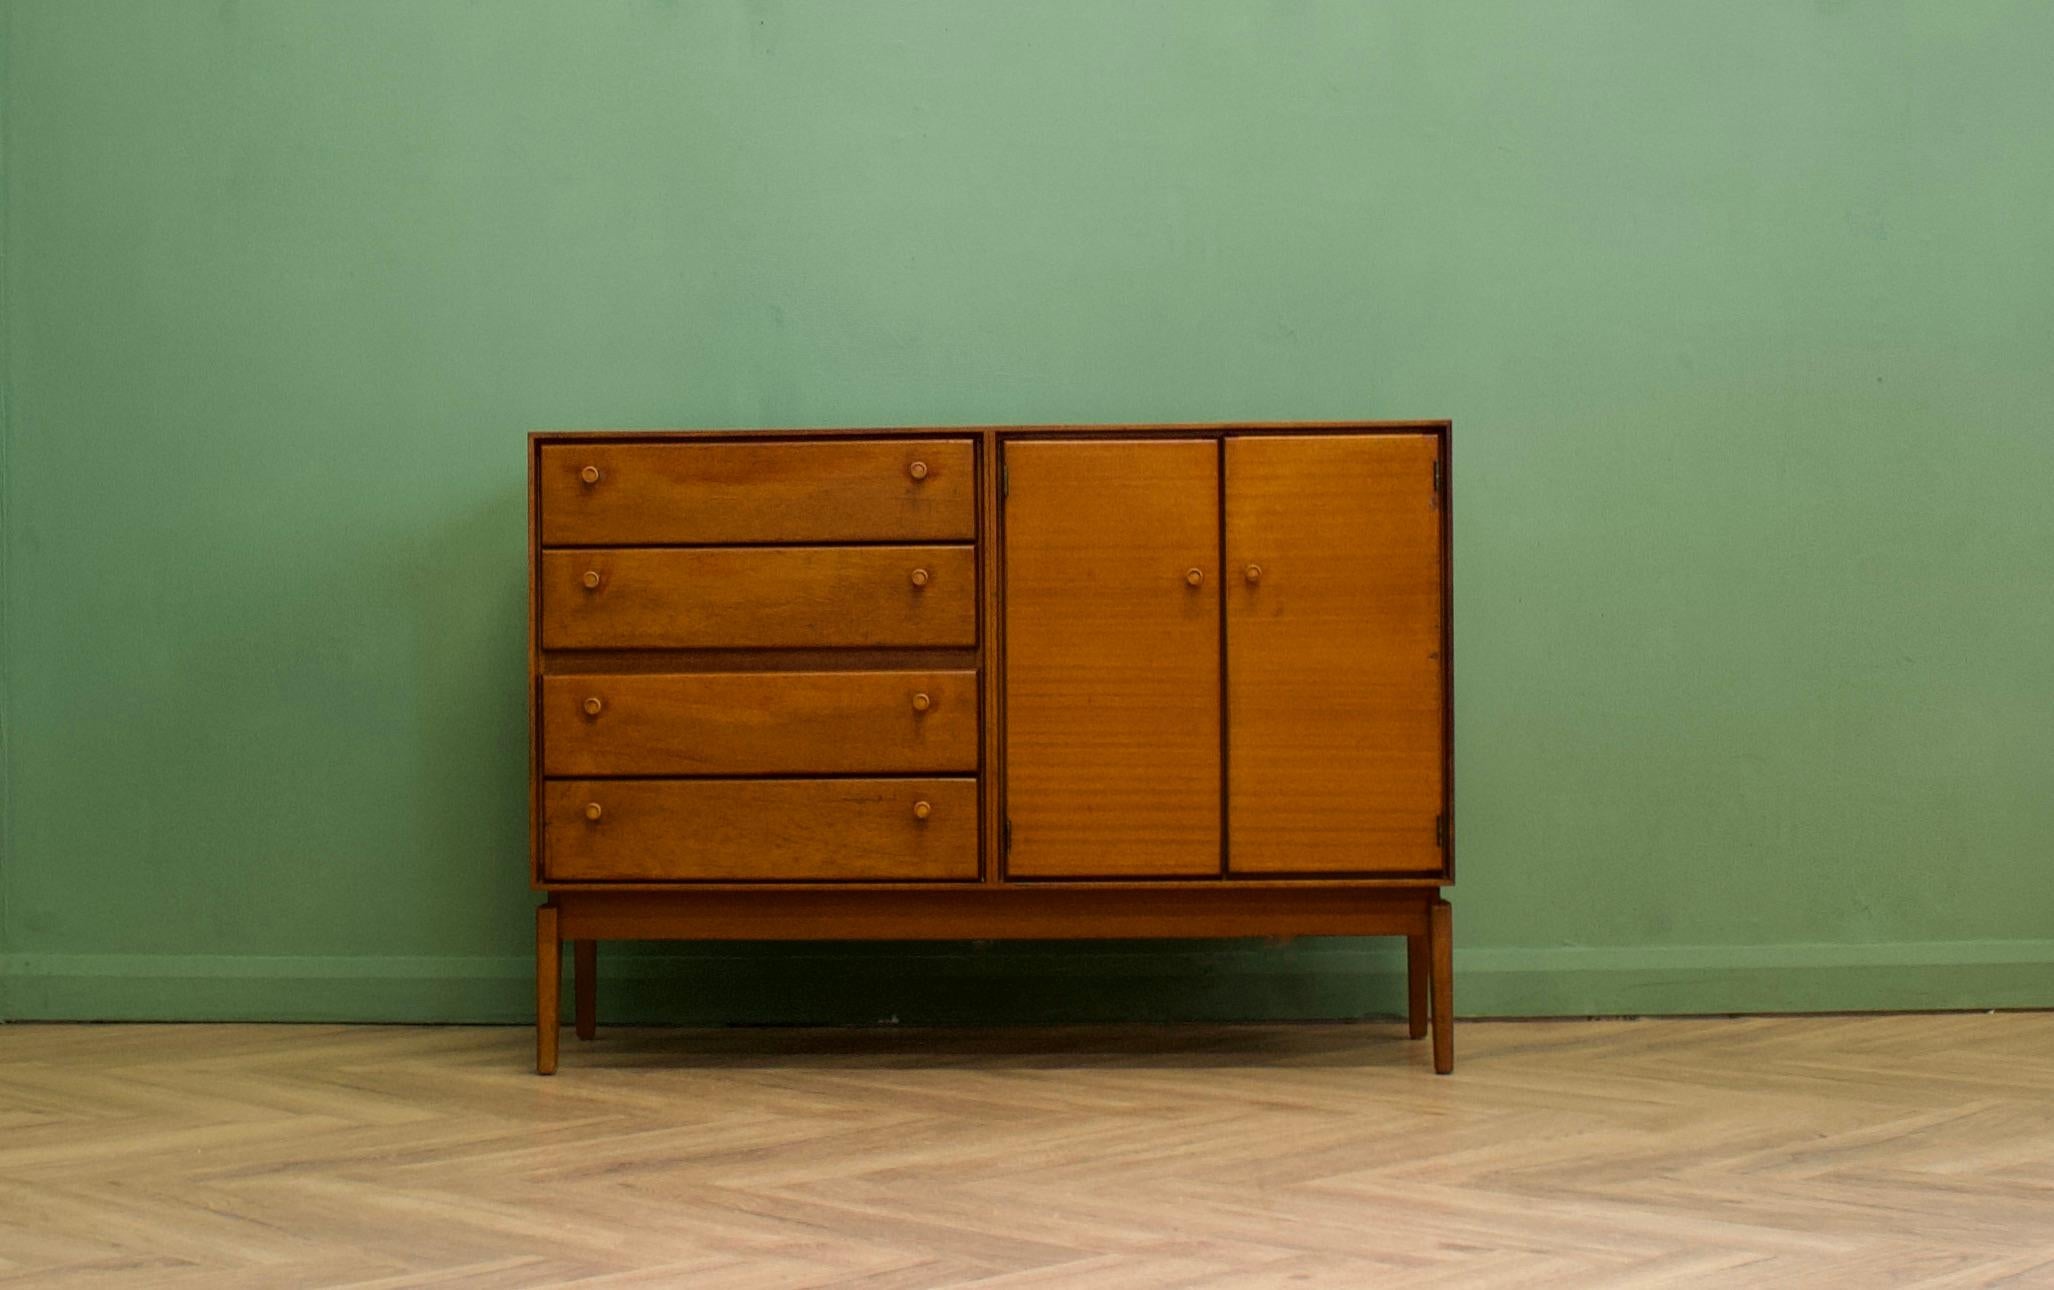 A mid century teak sideboard from Minty Library Specialists Oxford, circa 1960s

Featuring 4 drawers and a cupboard